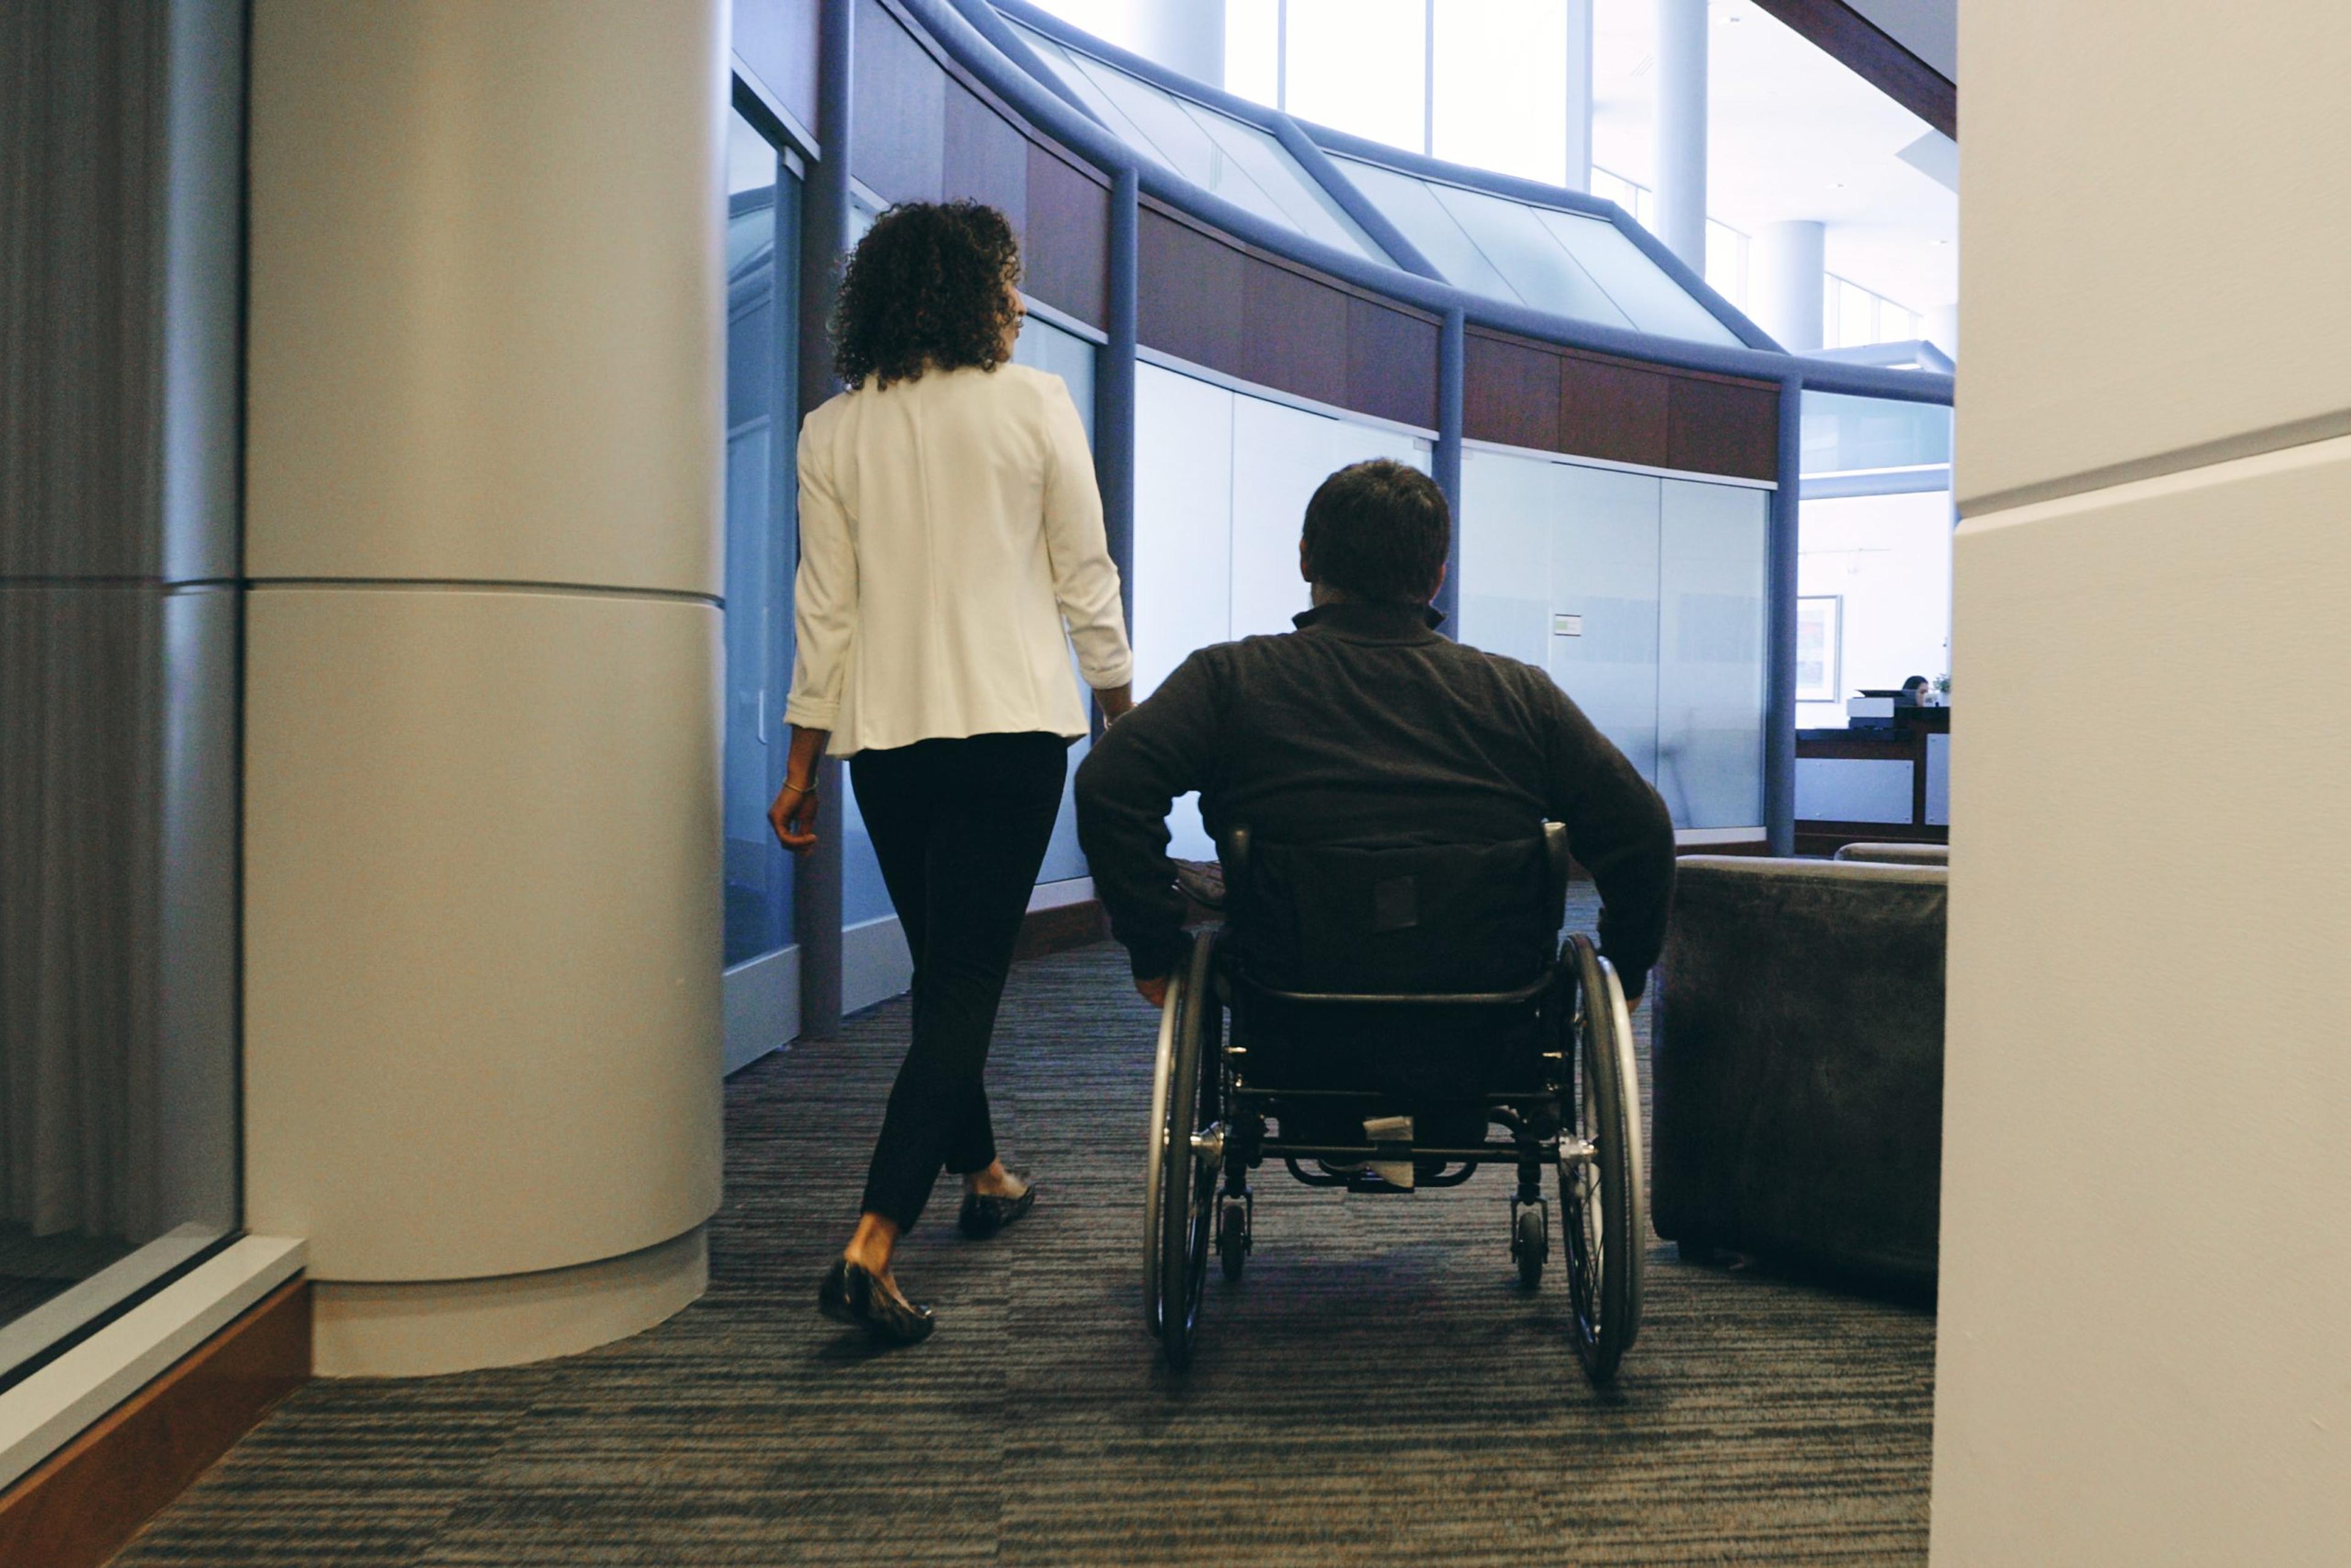 A person walks next to another person in a wheelchair in an office